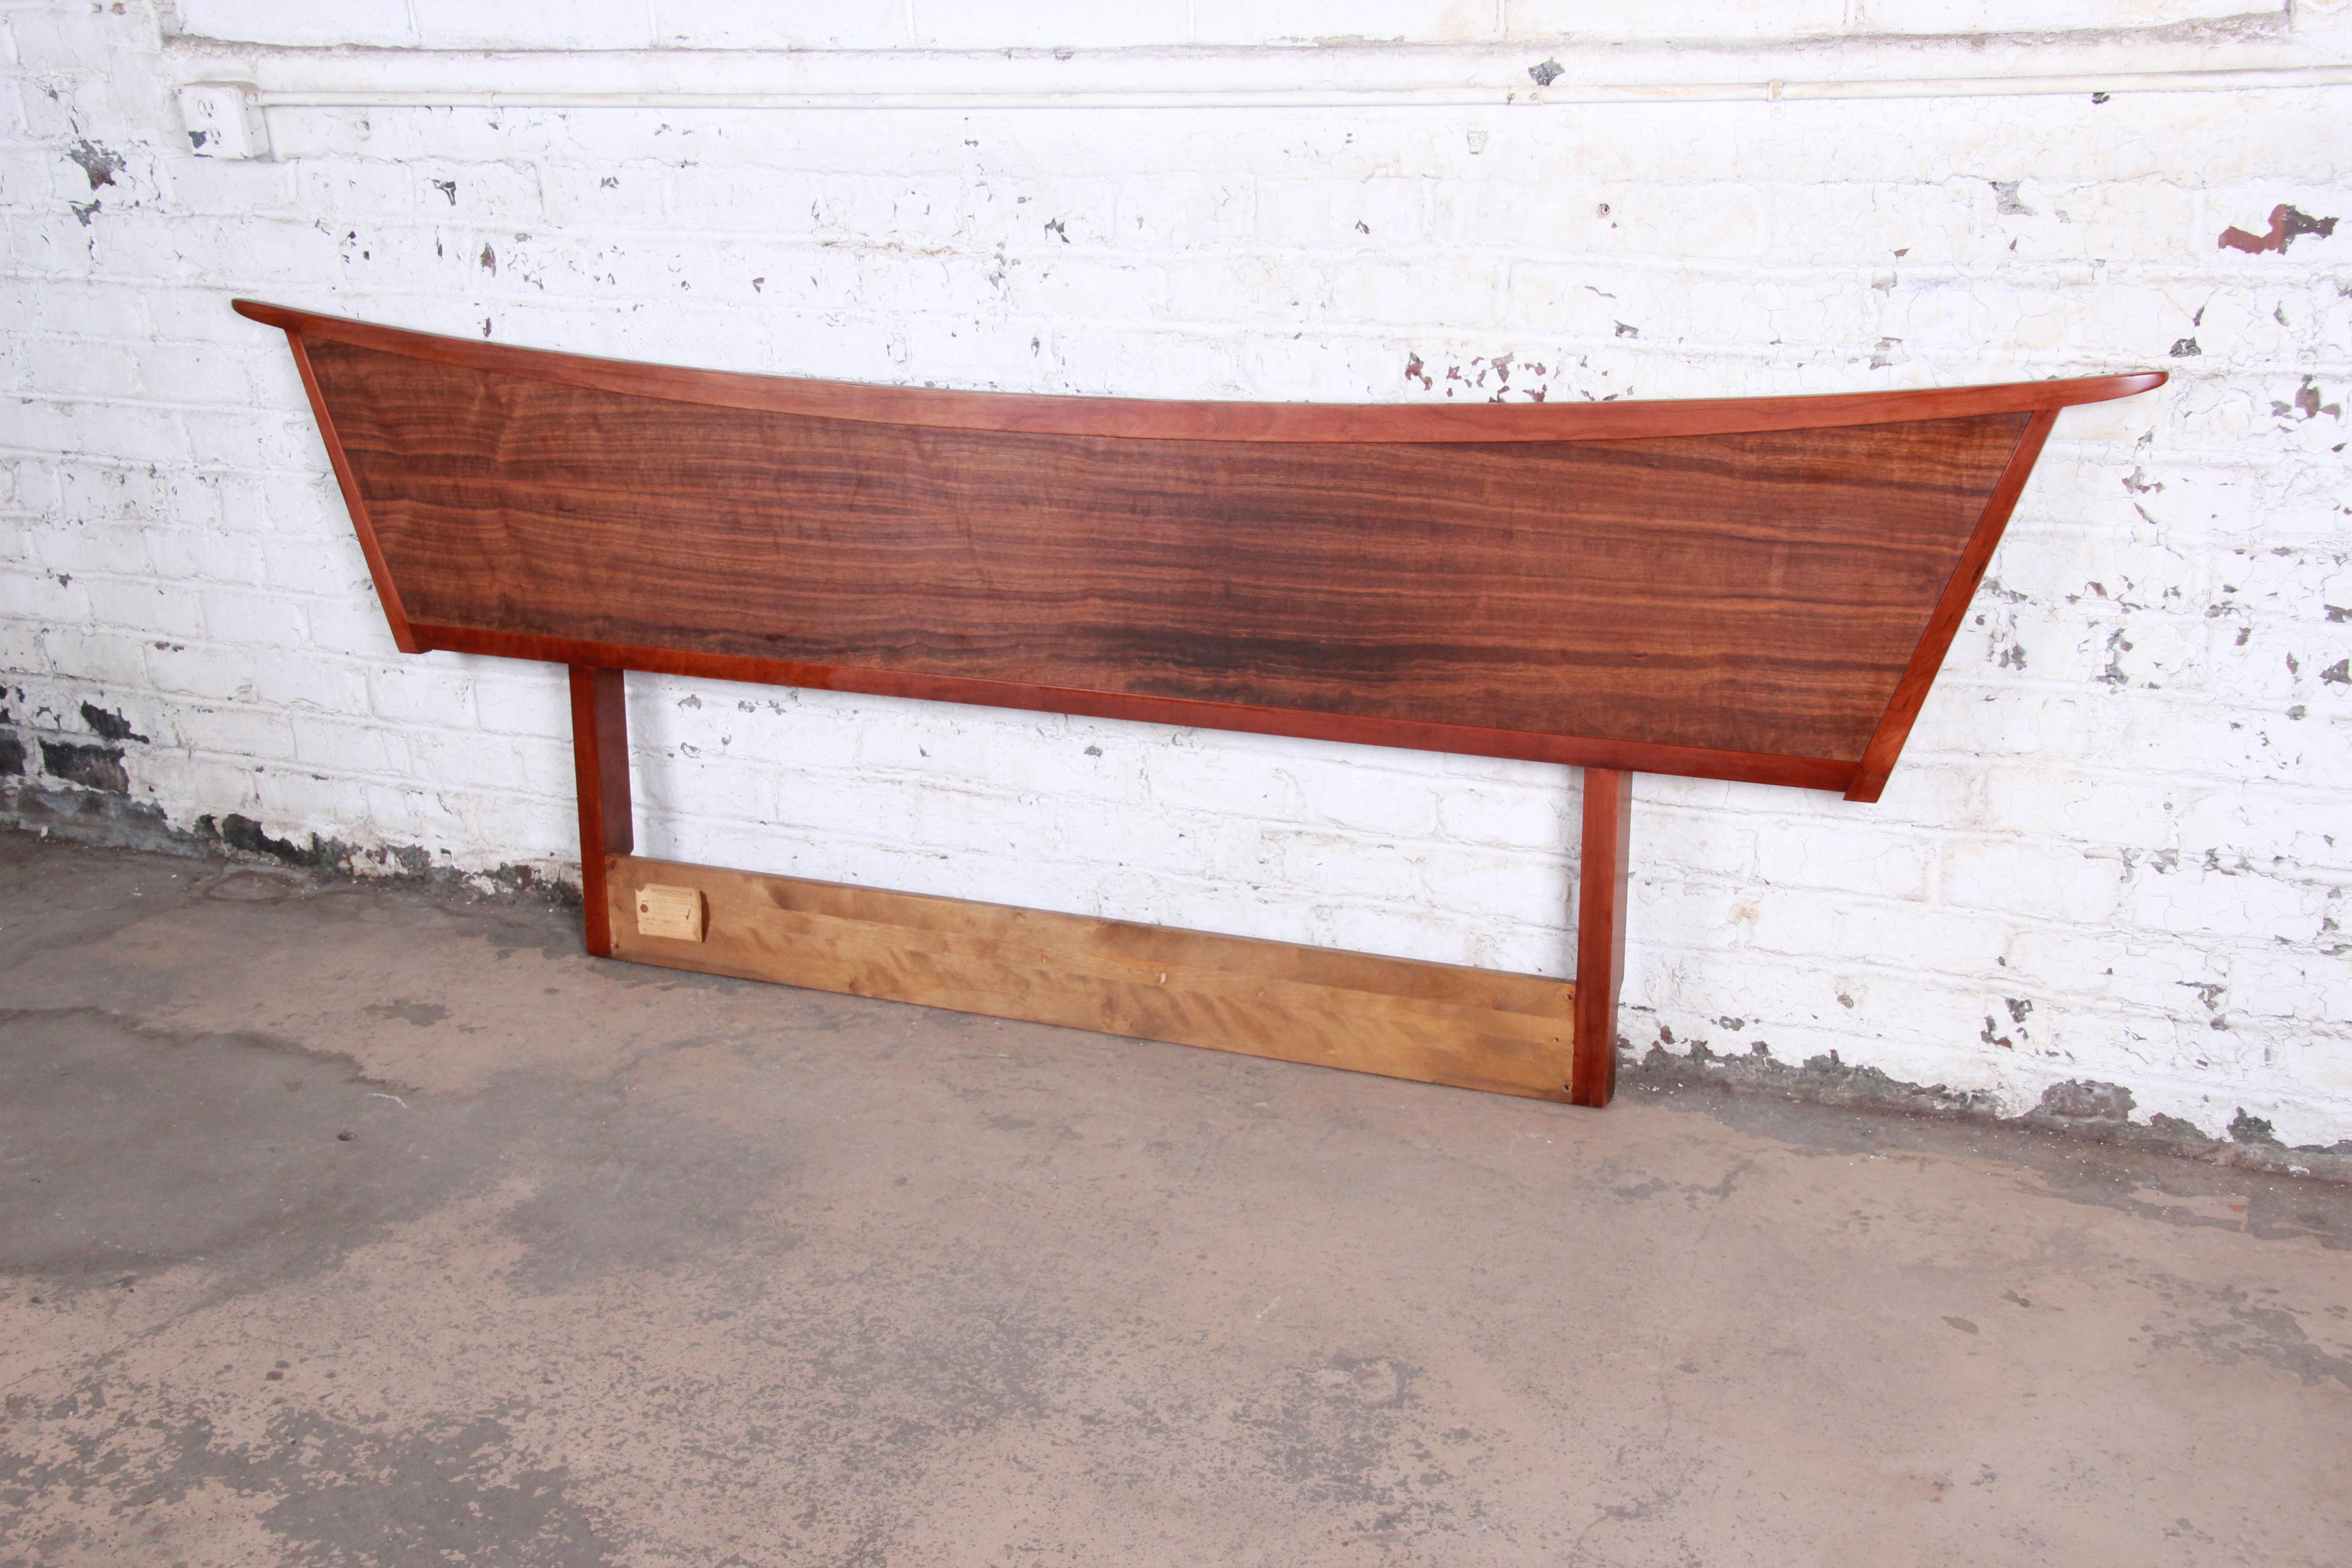 An extremely rare and outstanding Mid-Century Modern headboard from the Origins Collection by George Nakashima for Widdicomb Furniture of Grand Rapids. The headboard features a dramatic, sweeping form that is regal and elegant. The surface is